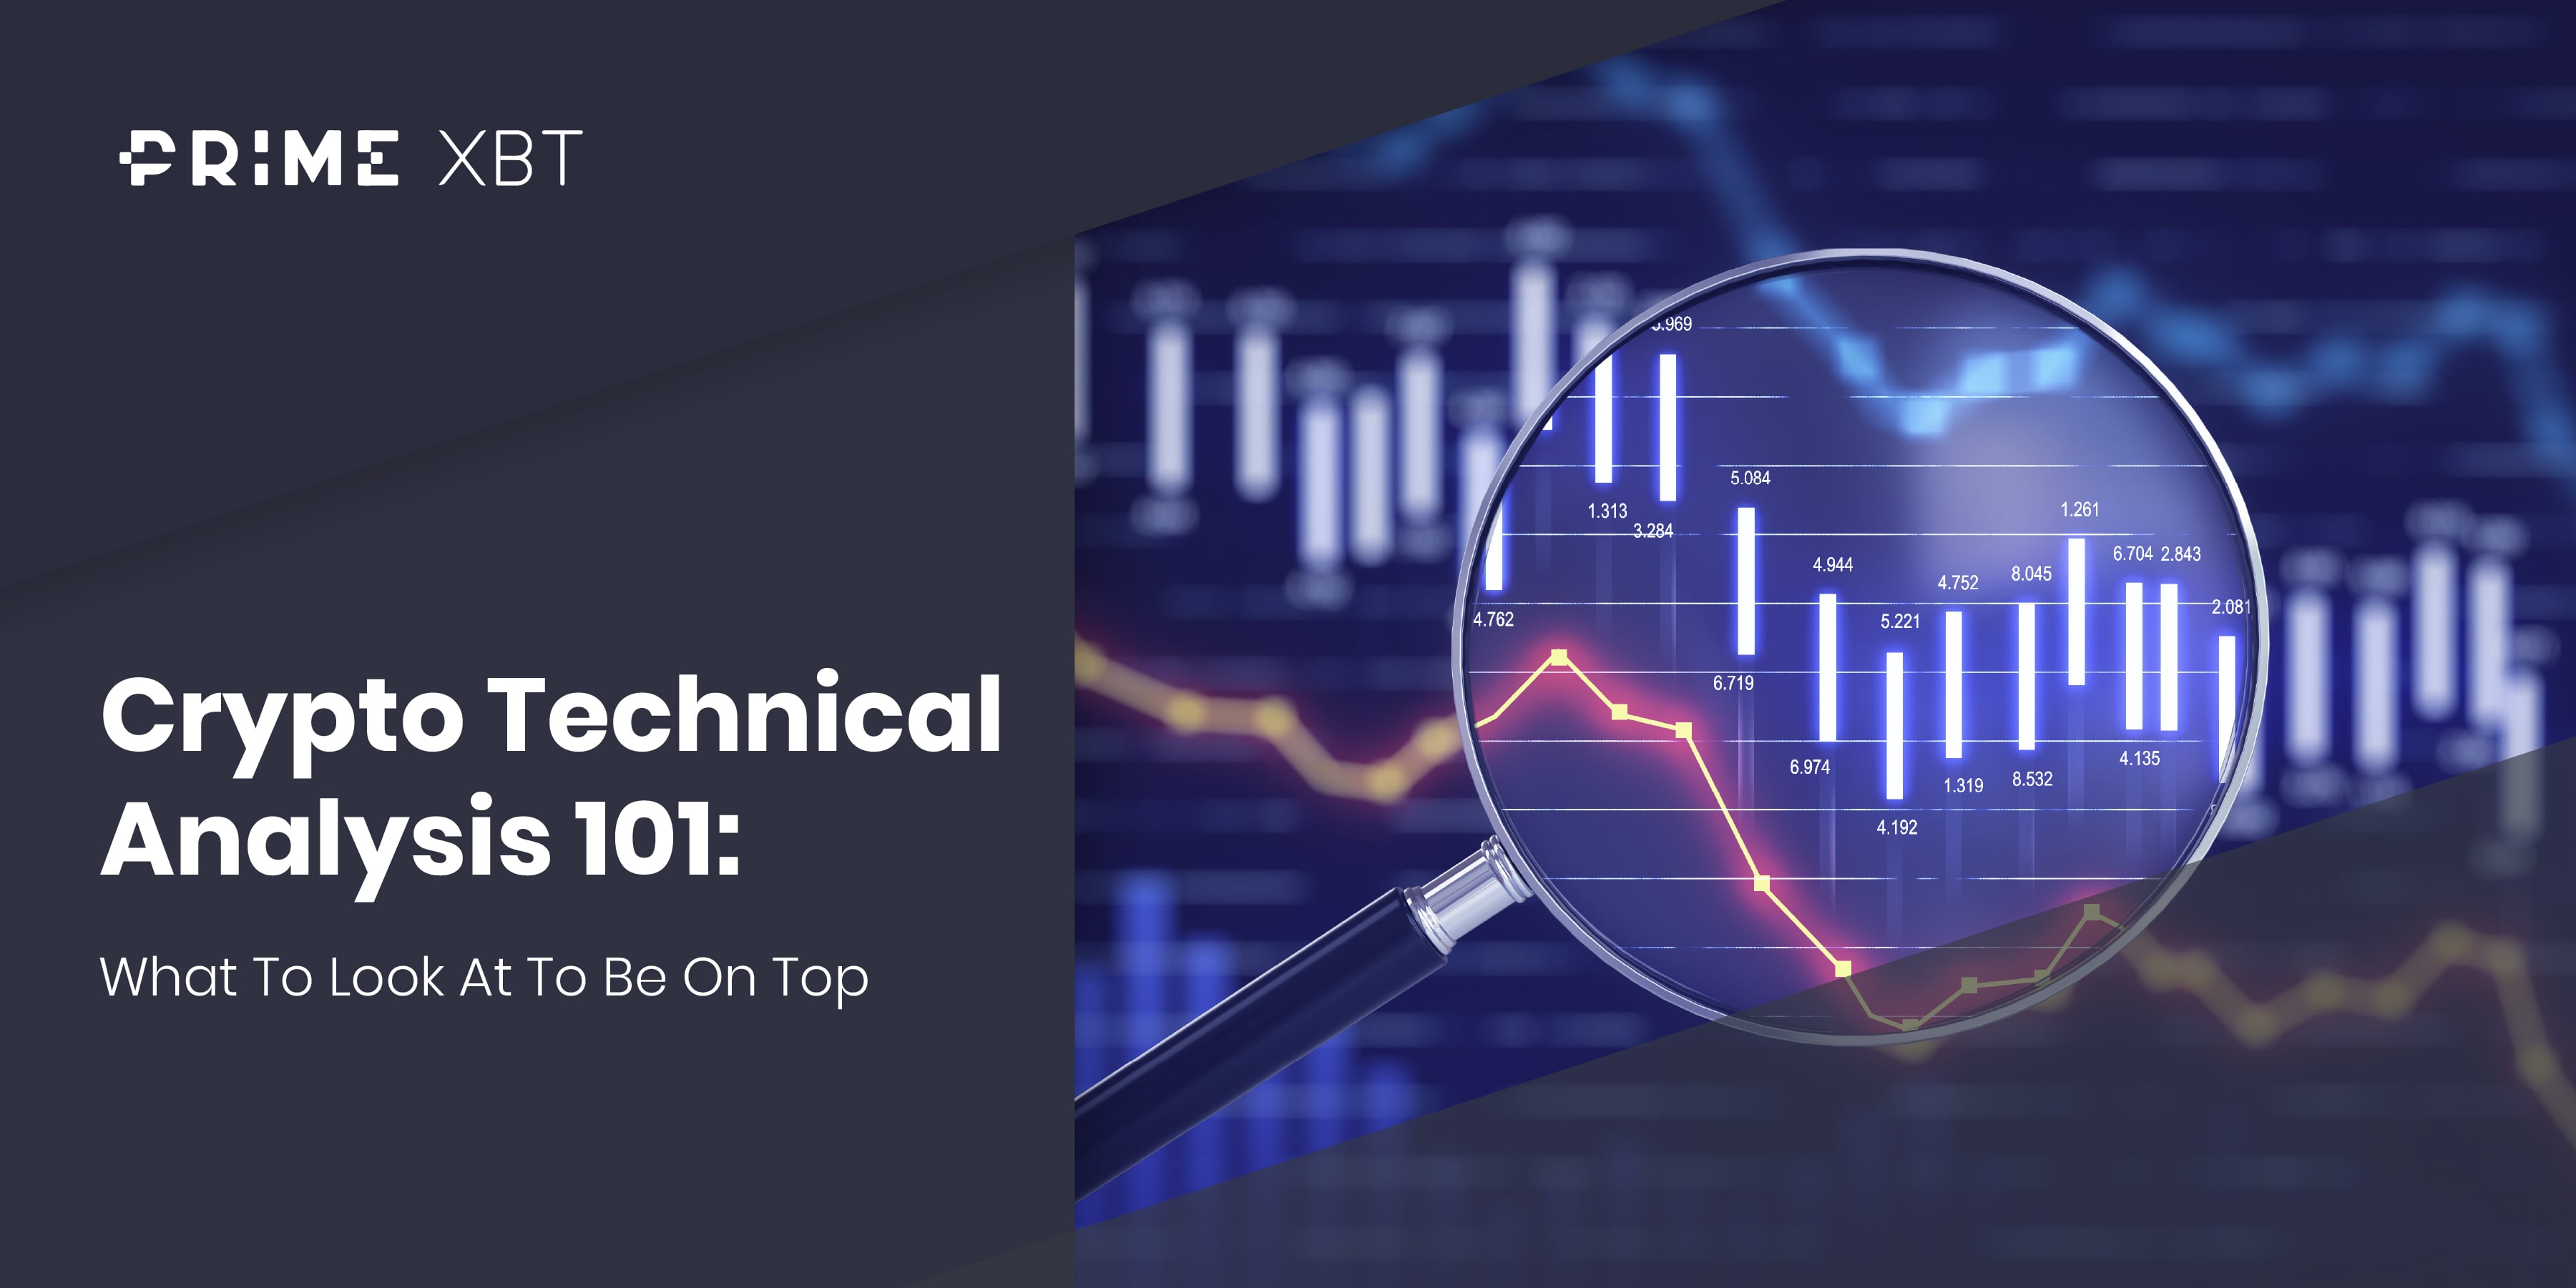 Crypto Technical Analysis 101: What To Look At To Be On Top - Analysis 101 29 10 min